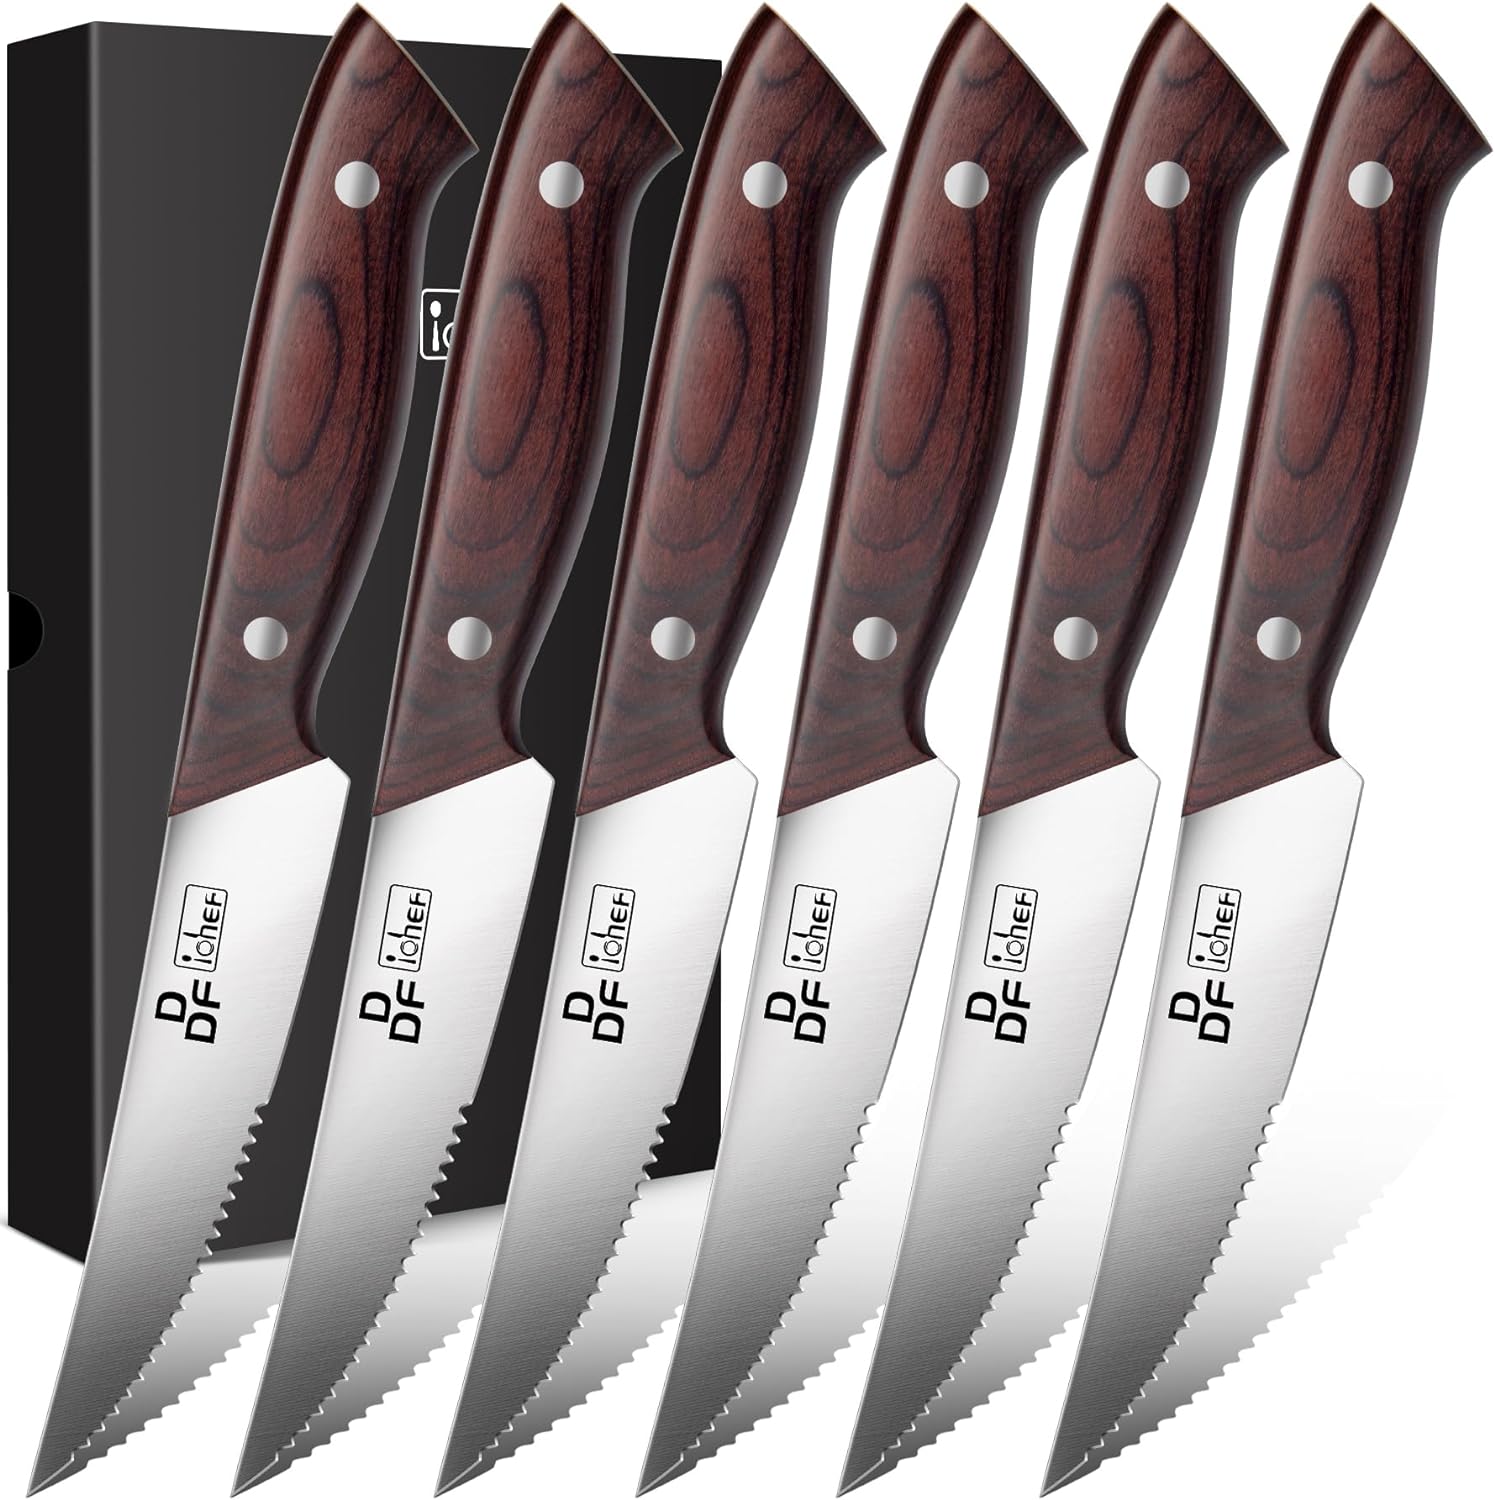 DDF iohEF Kitchen Knife Set, 16-Piece Knife Sets for Kitchen with Block Japanese Stainless Steel Knives Set with Sharpener Ultra Sharp Professional Chef Knife Set with Ergonomic Handle for Cutting